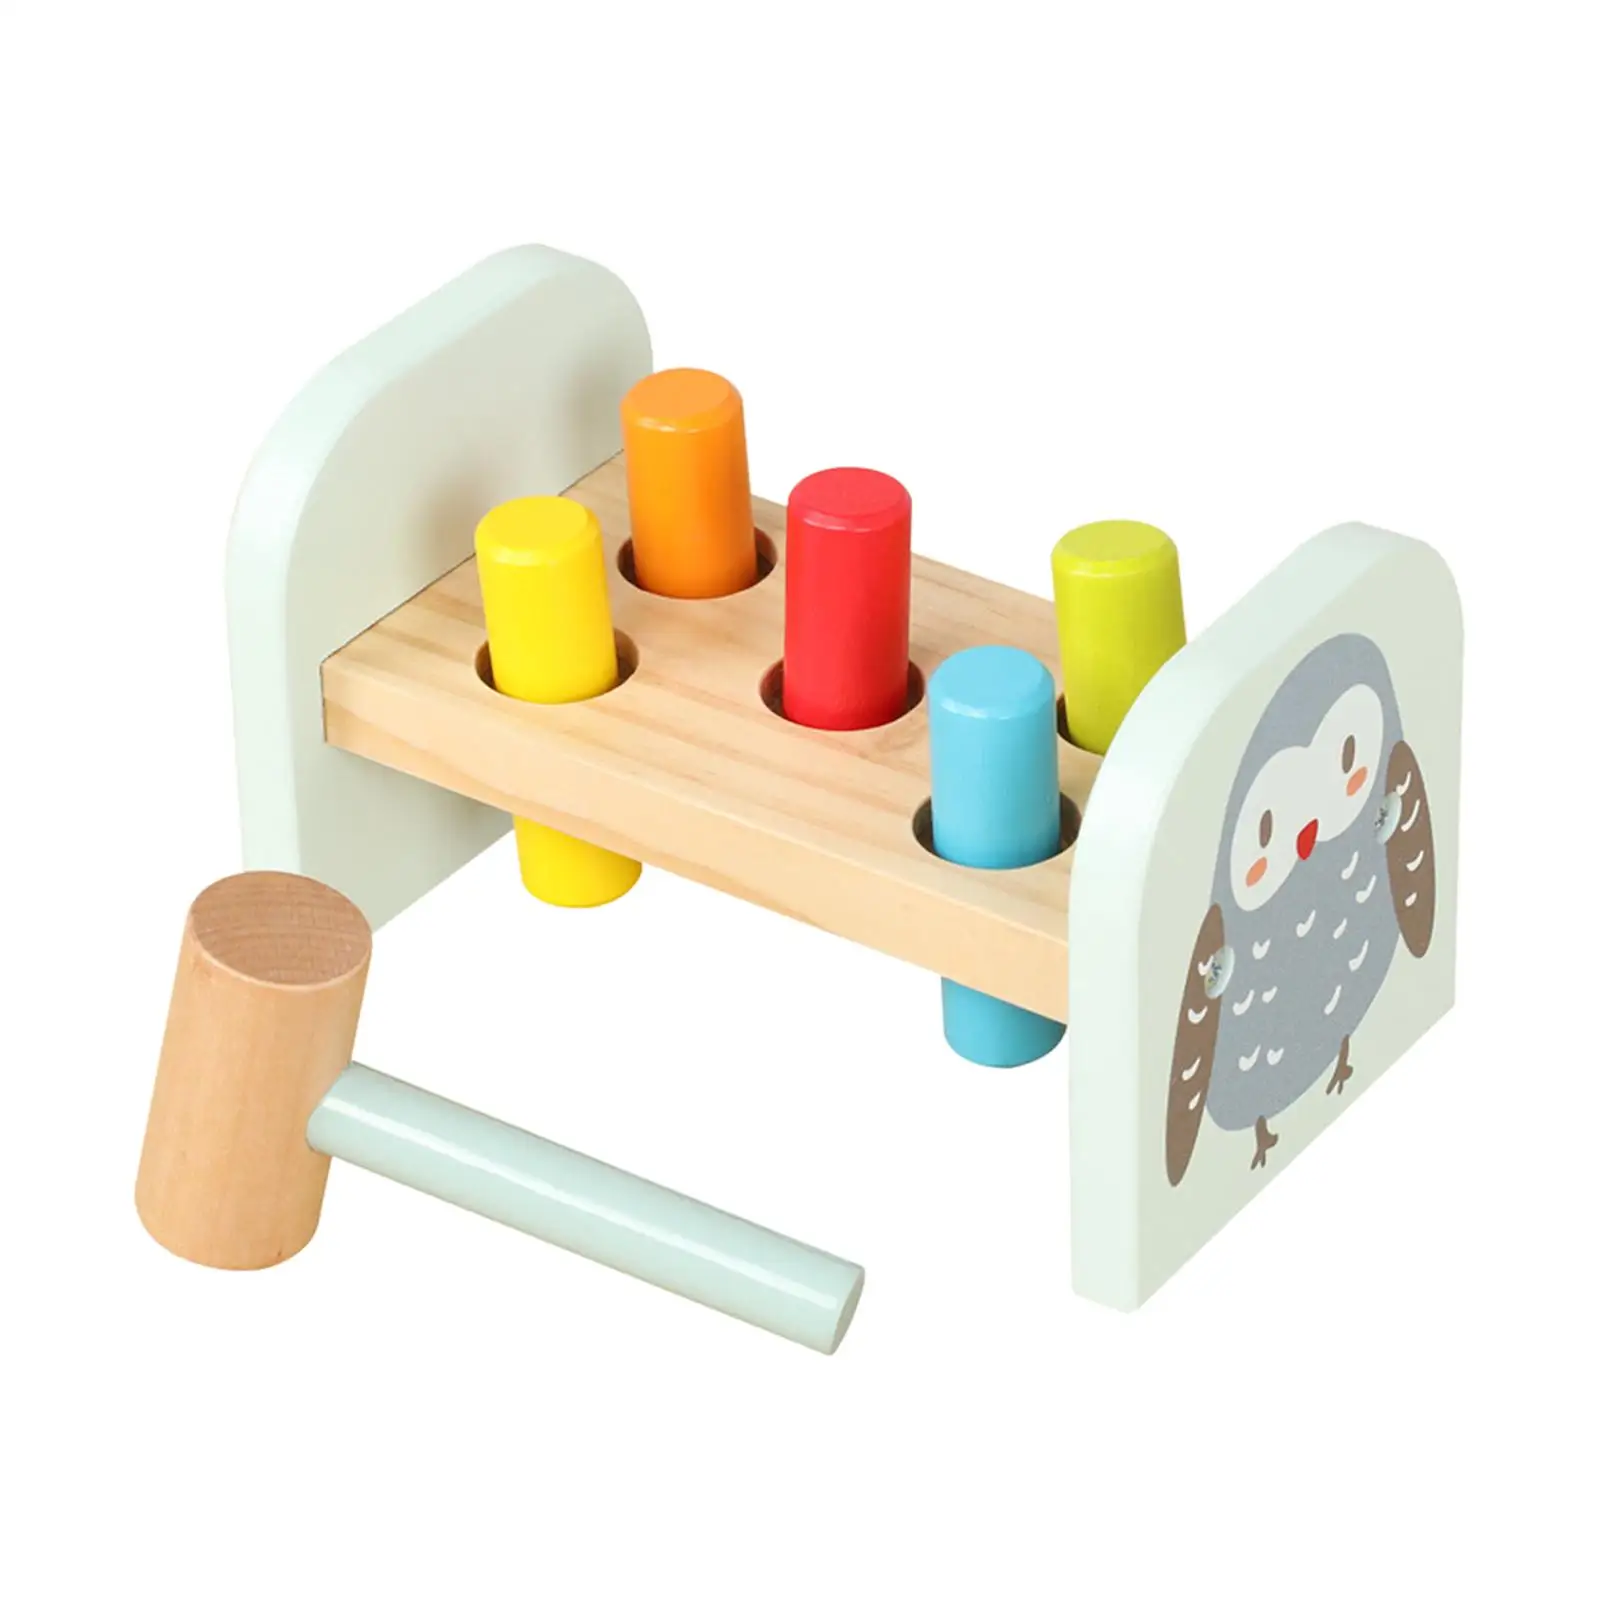 Wooden Pound Toy, Wooden Pounding Toy, Early Learning With Mallet Wooden